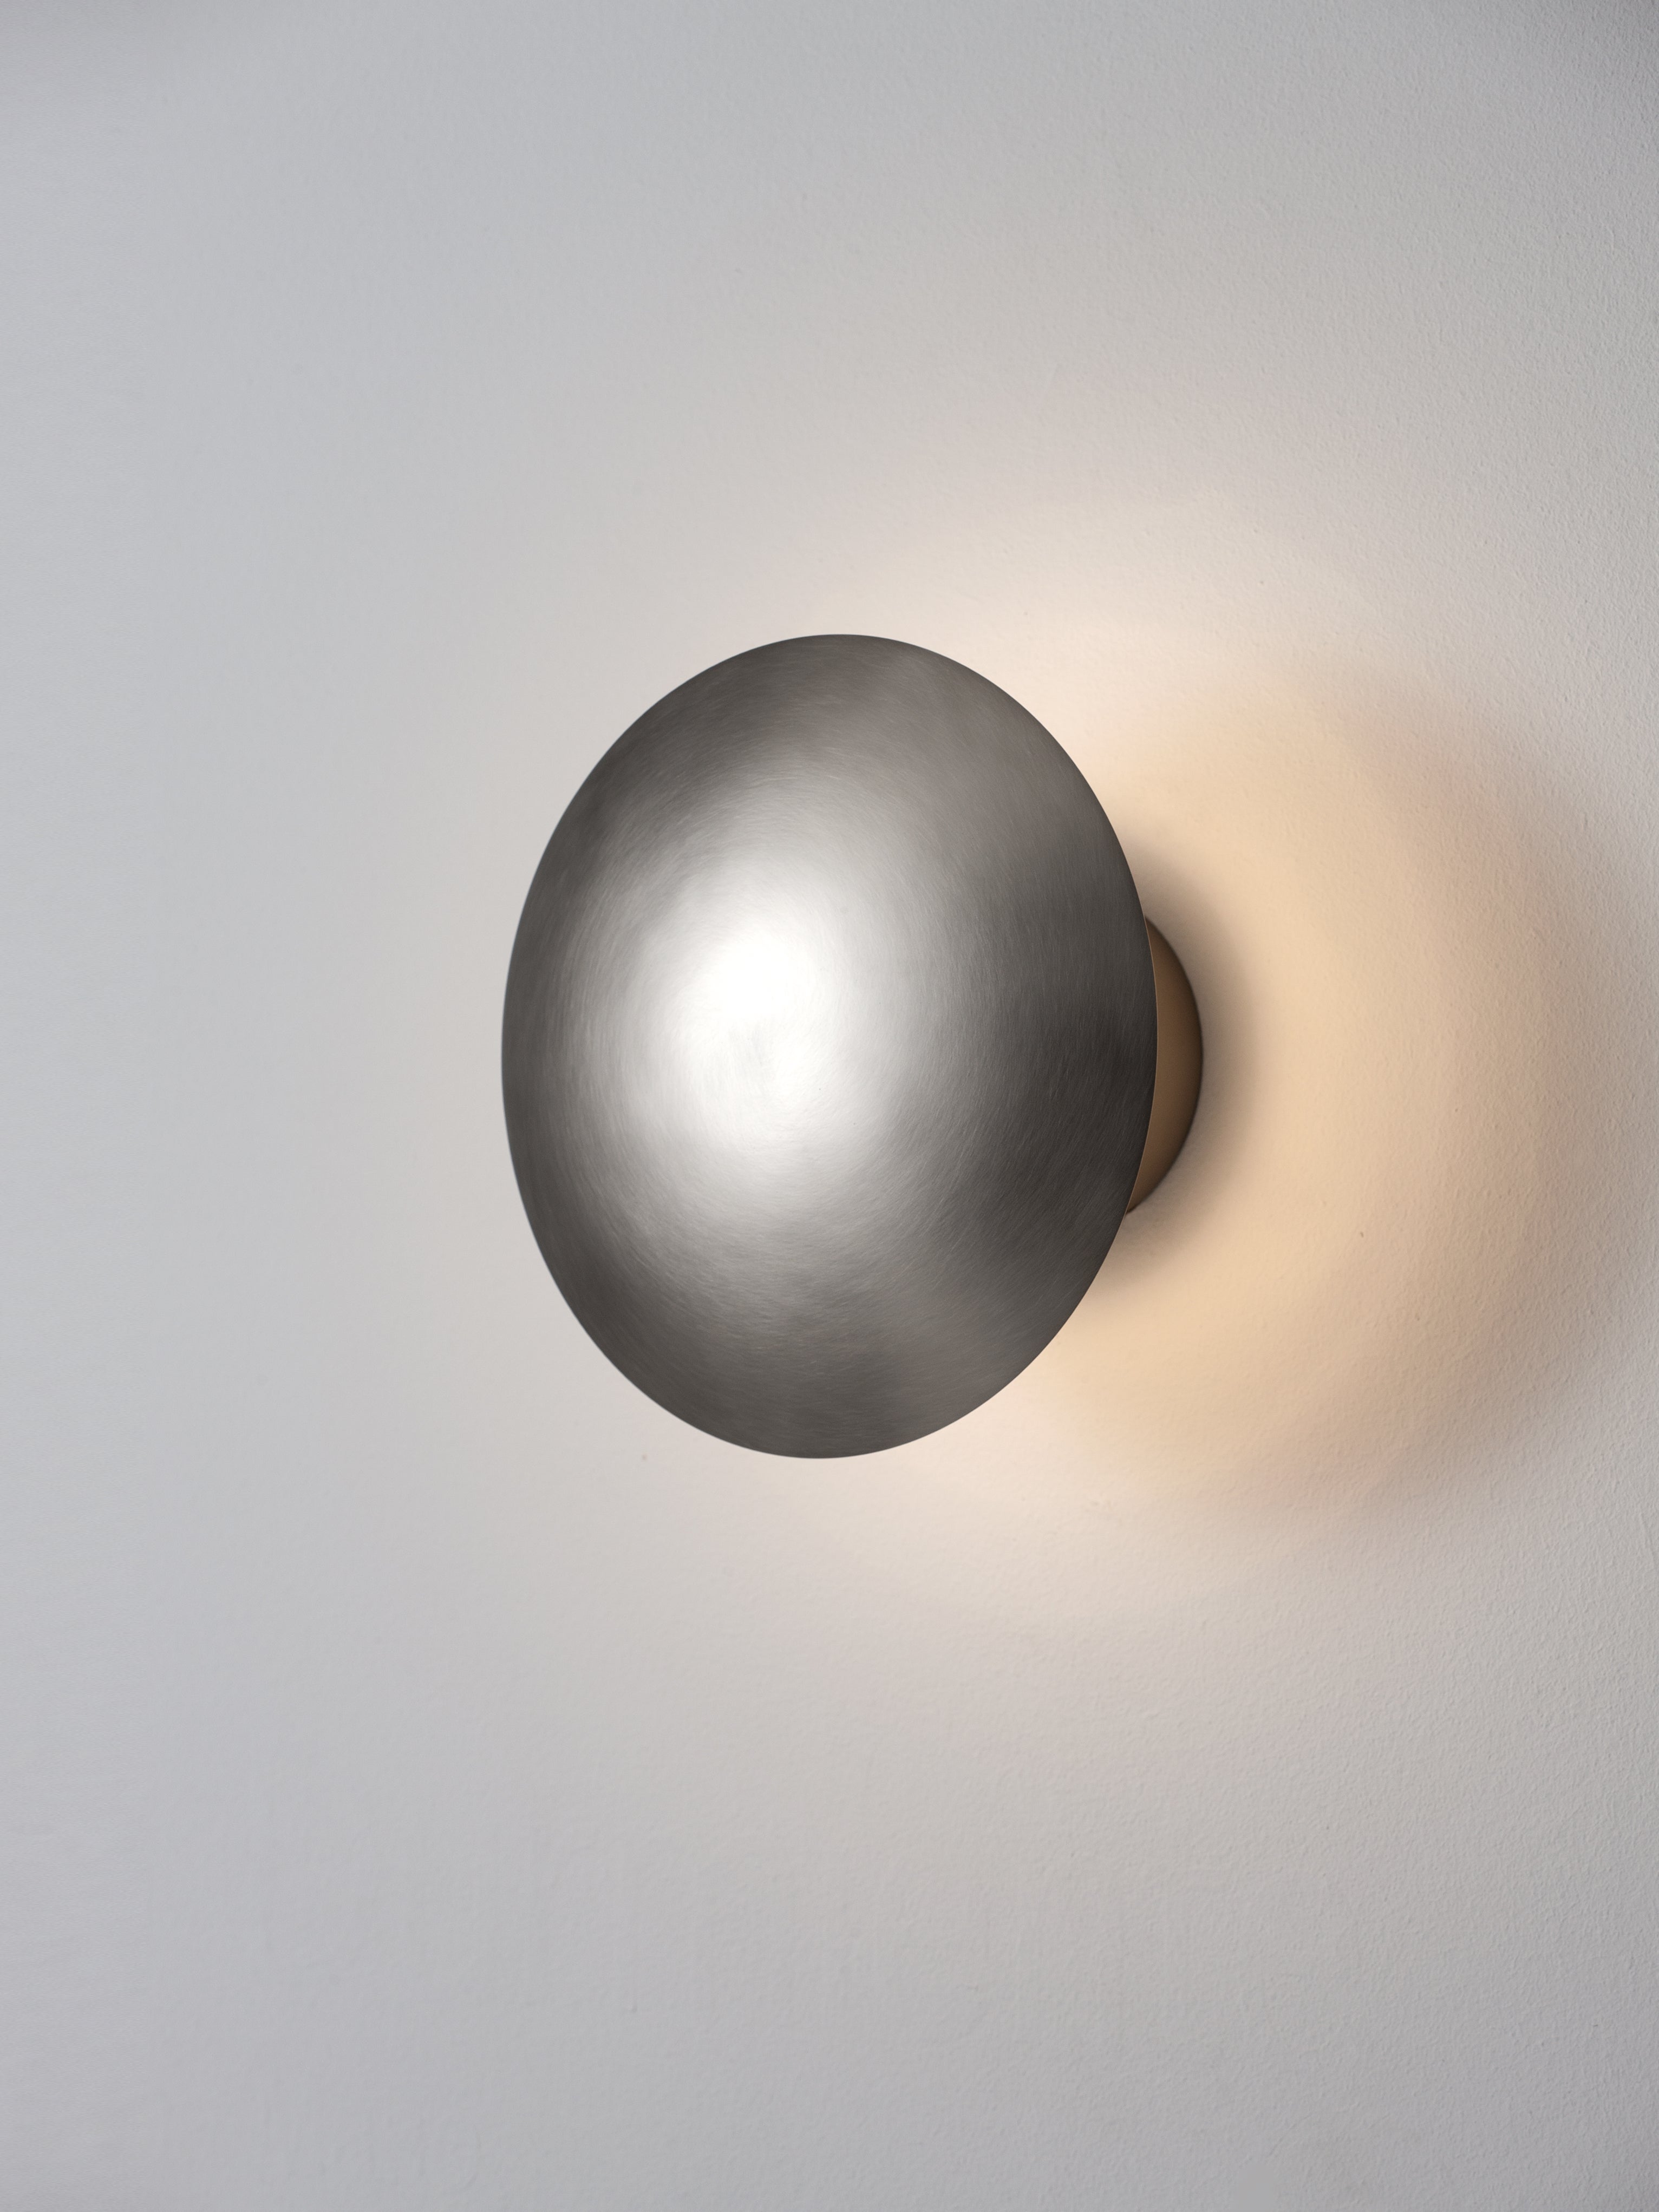 Medium Disco wall lamp by Jordi Miralbell, Mariona Raventós
Dimensions: D 24 x W 13 x H 24 cm
Materials: Metal.
Available in 2 sizes: D24, D35 cm.

This metallic disc, available in two sizes, M and L, reflects its light on the wall, creating a halo